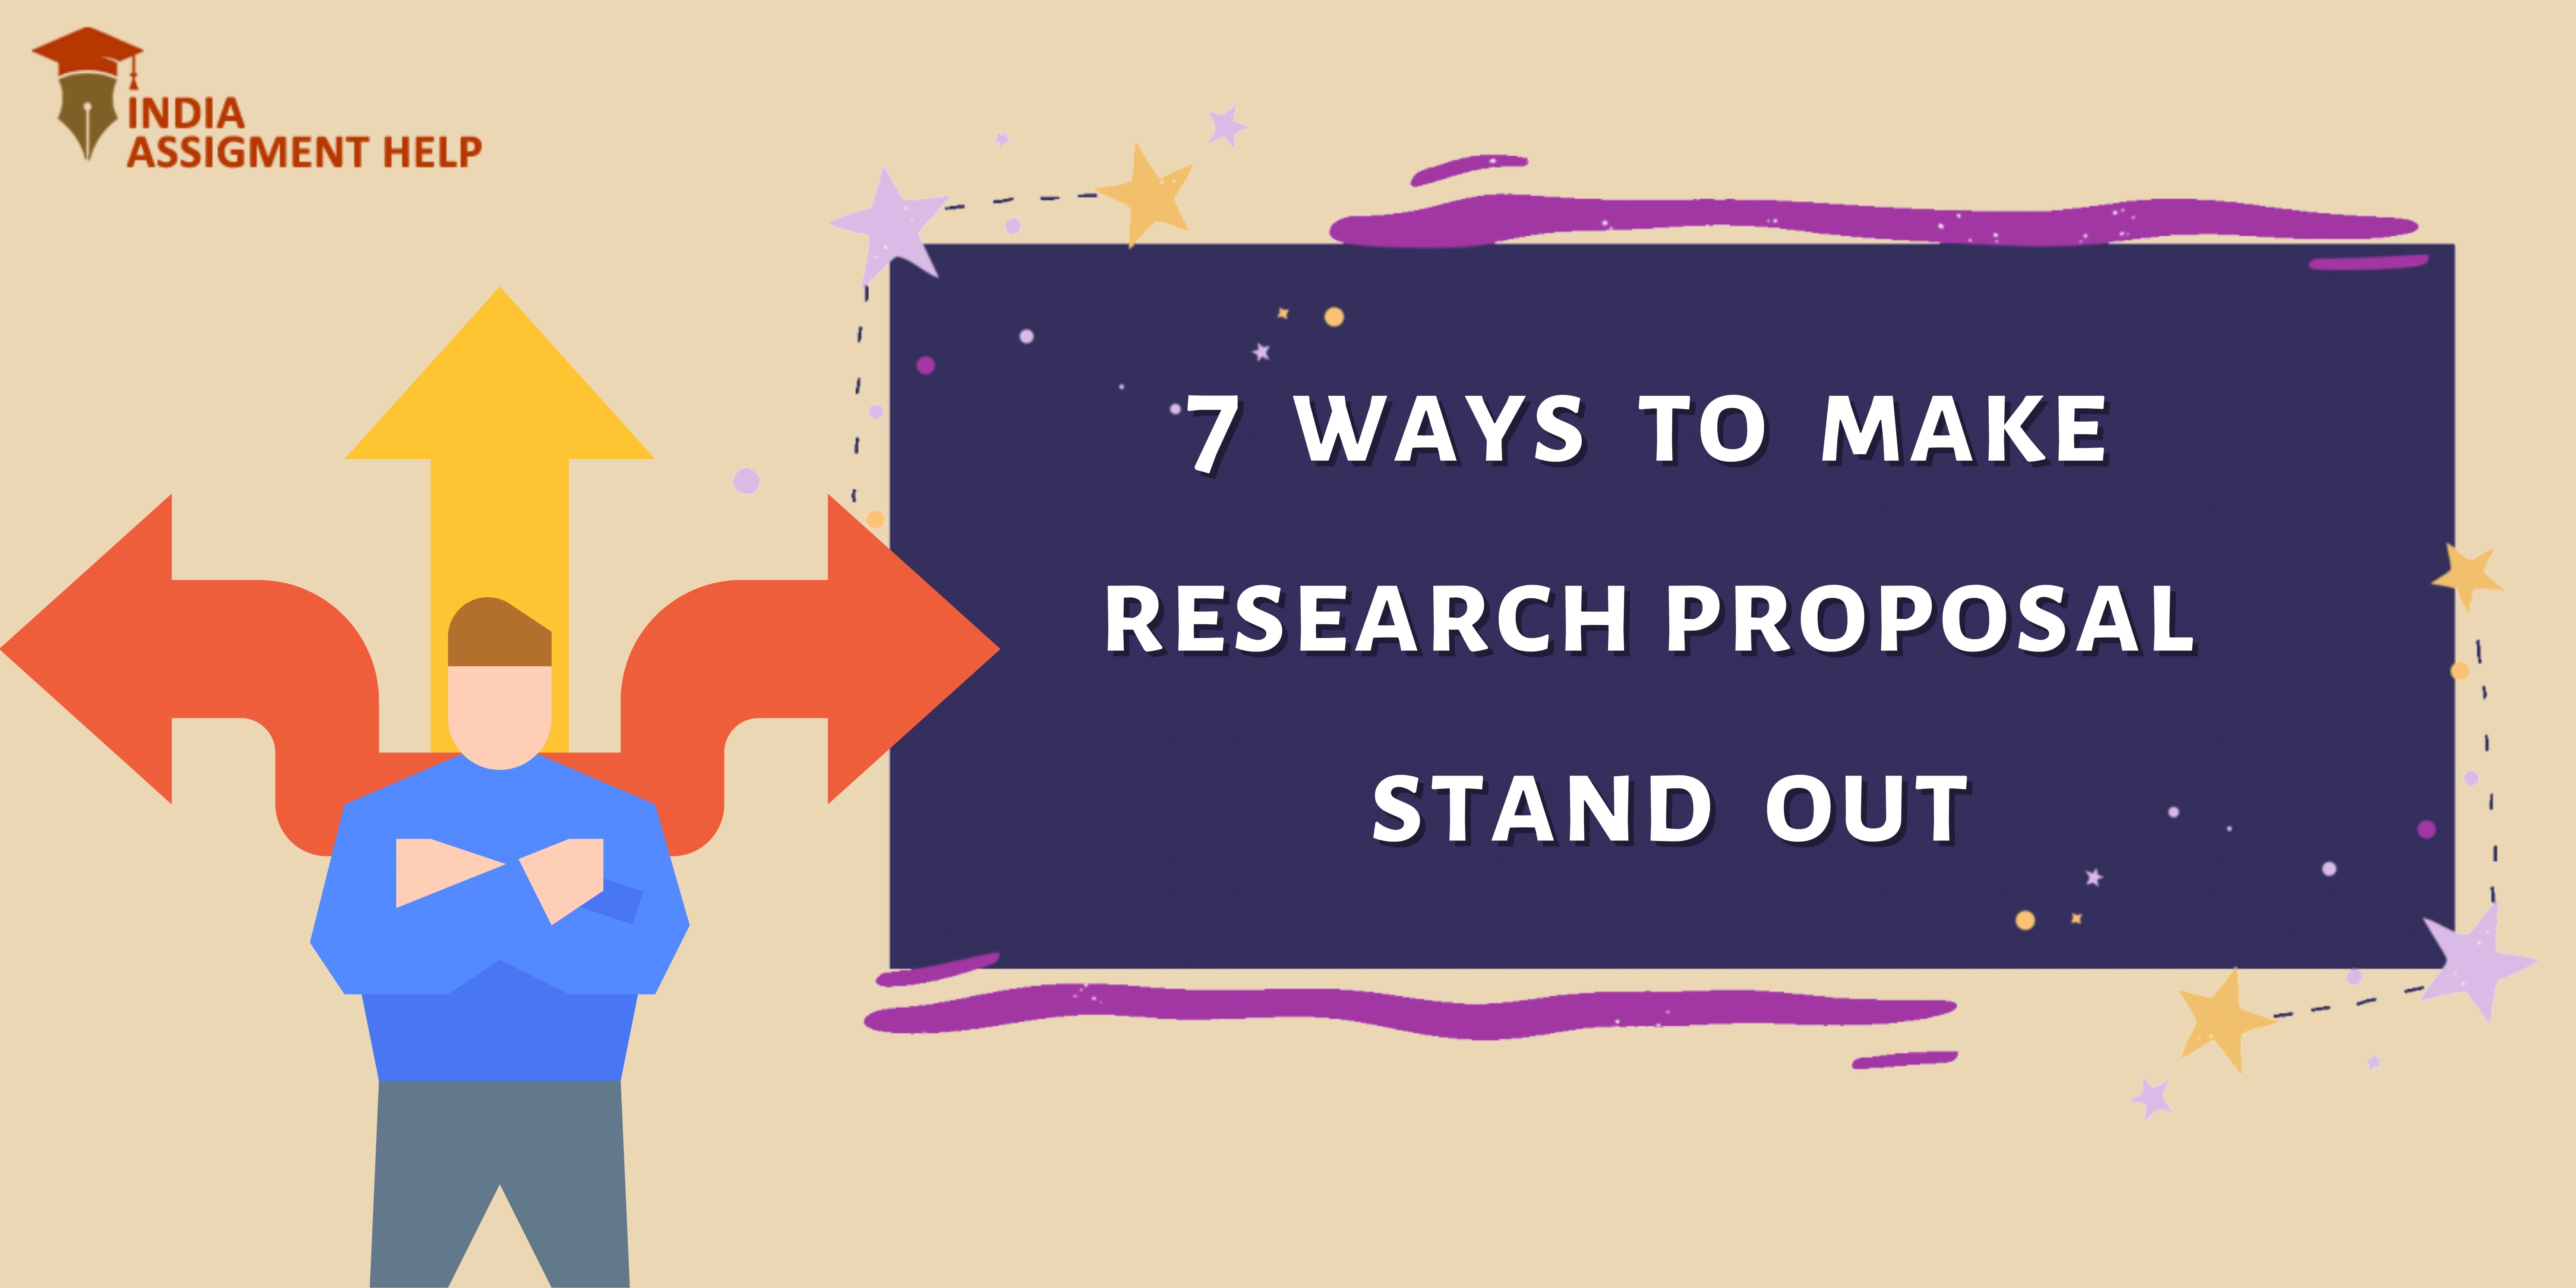 7 ways to make a research proposal stand out